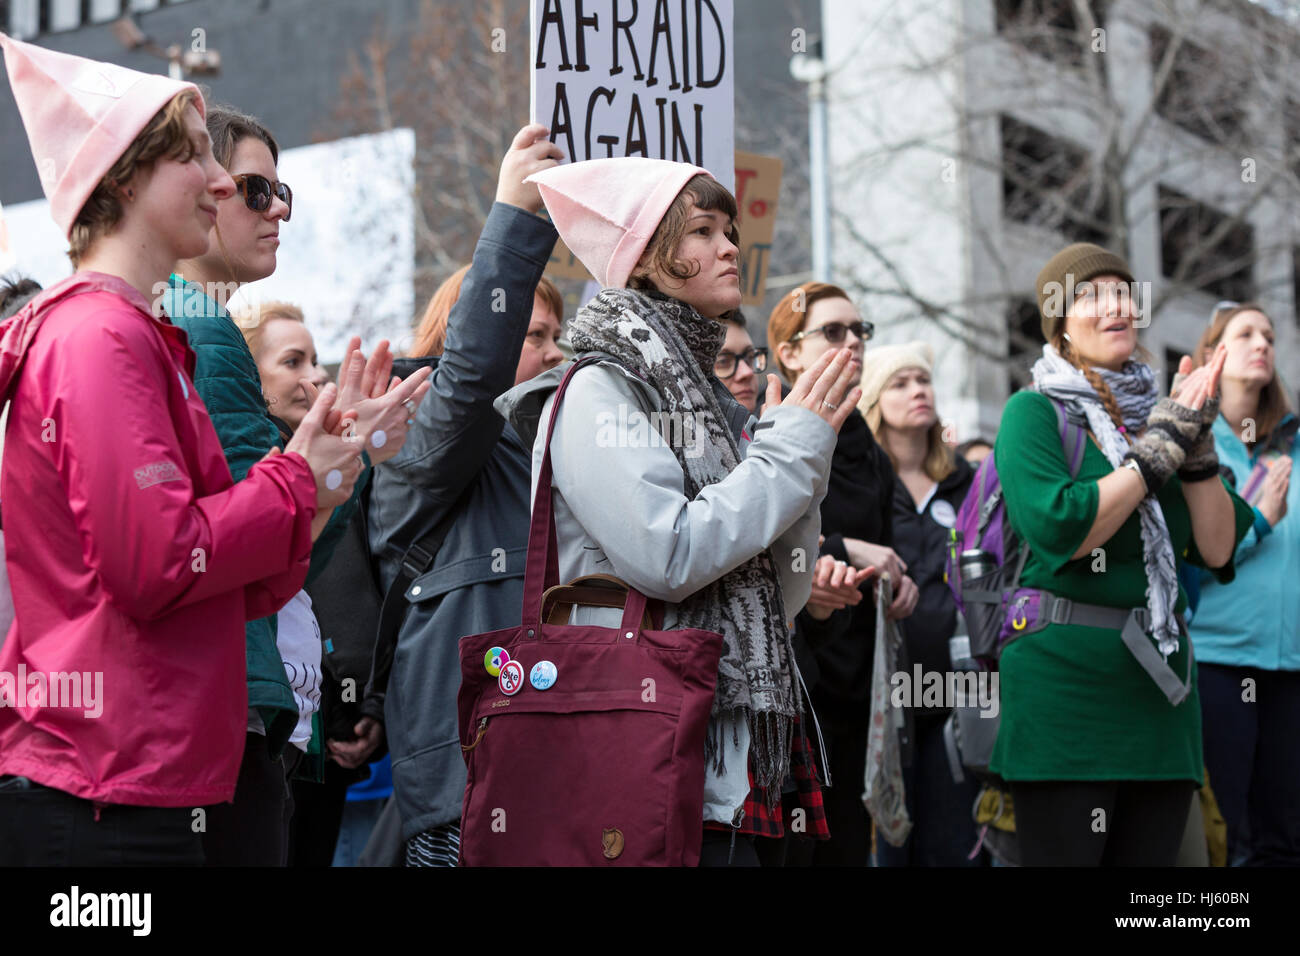 Seattle, United States. 21st Jan, 2017. Seattle, Washington: Supporters clap for a speaker as they pass through downtown. Over 100,000 people attended the Womxn's March on Seattle on January 21, 2017 in solidarity with the national Women's March on Washington, DC The mission of the silent march is to bring diverse women together for collective action. Credit: Paul Gordon/Alamy Live News Stock Photo